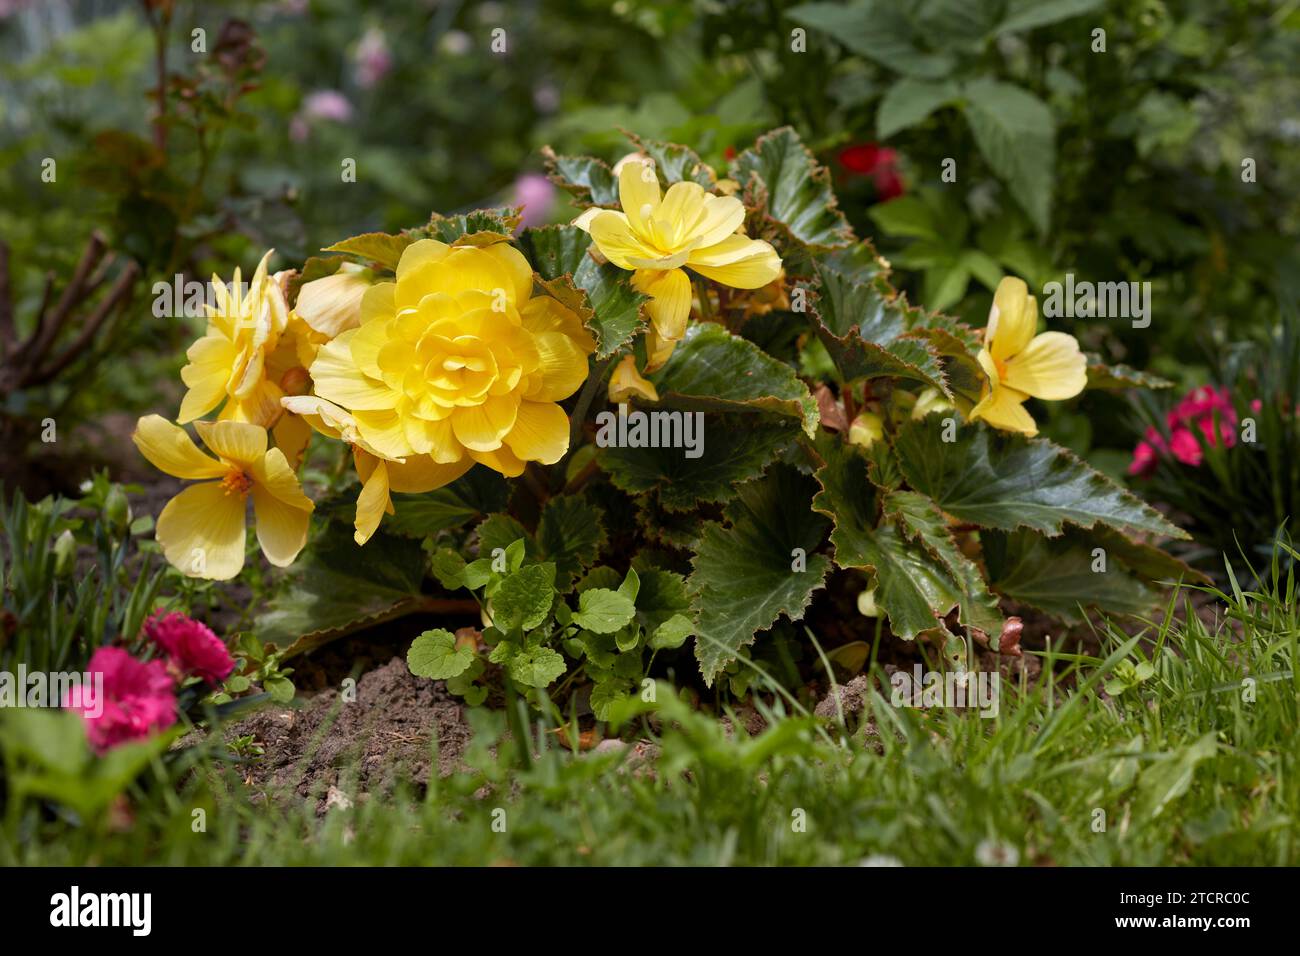 Growing Begonia plant in bloom. Stock Photo